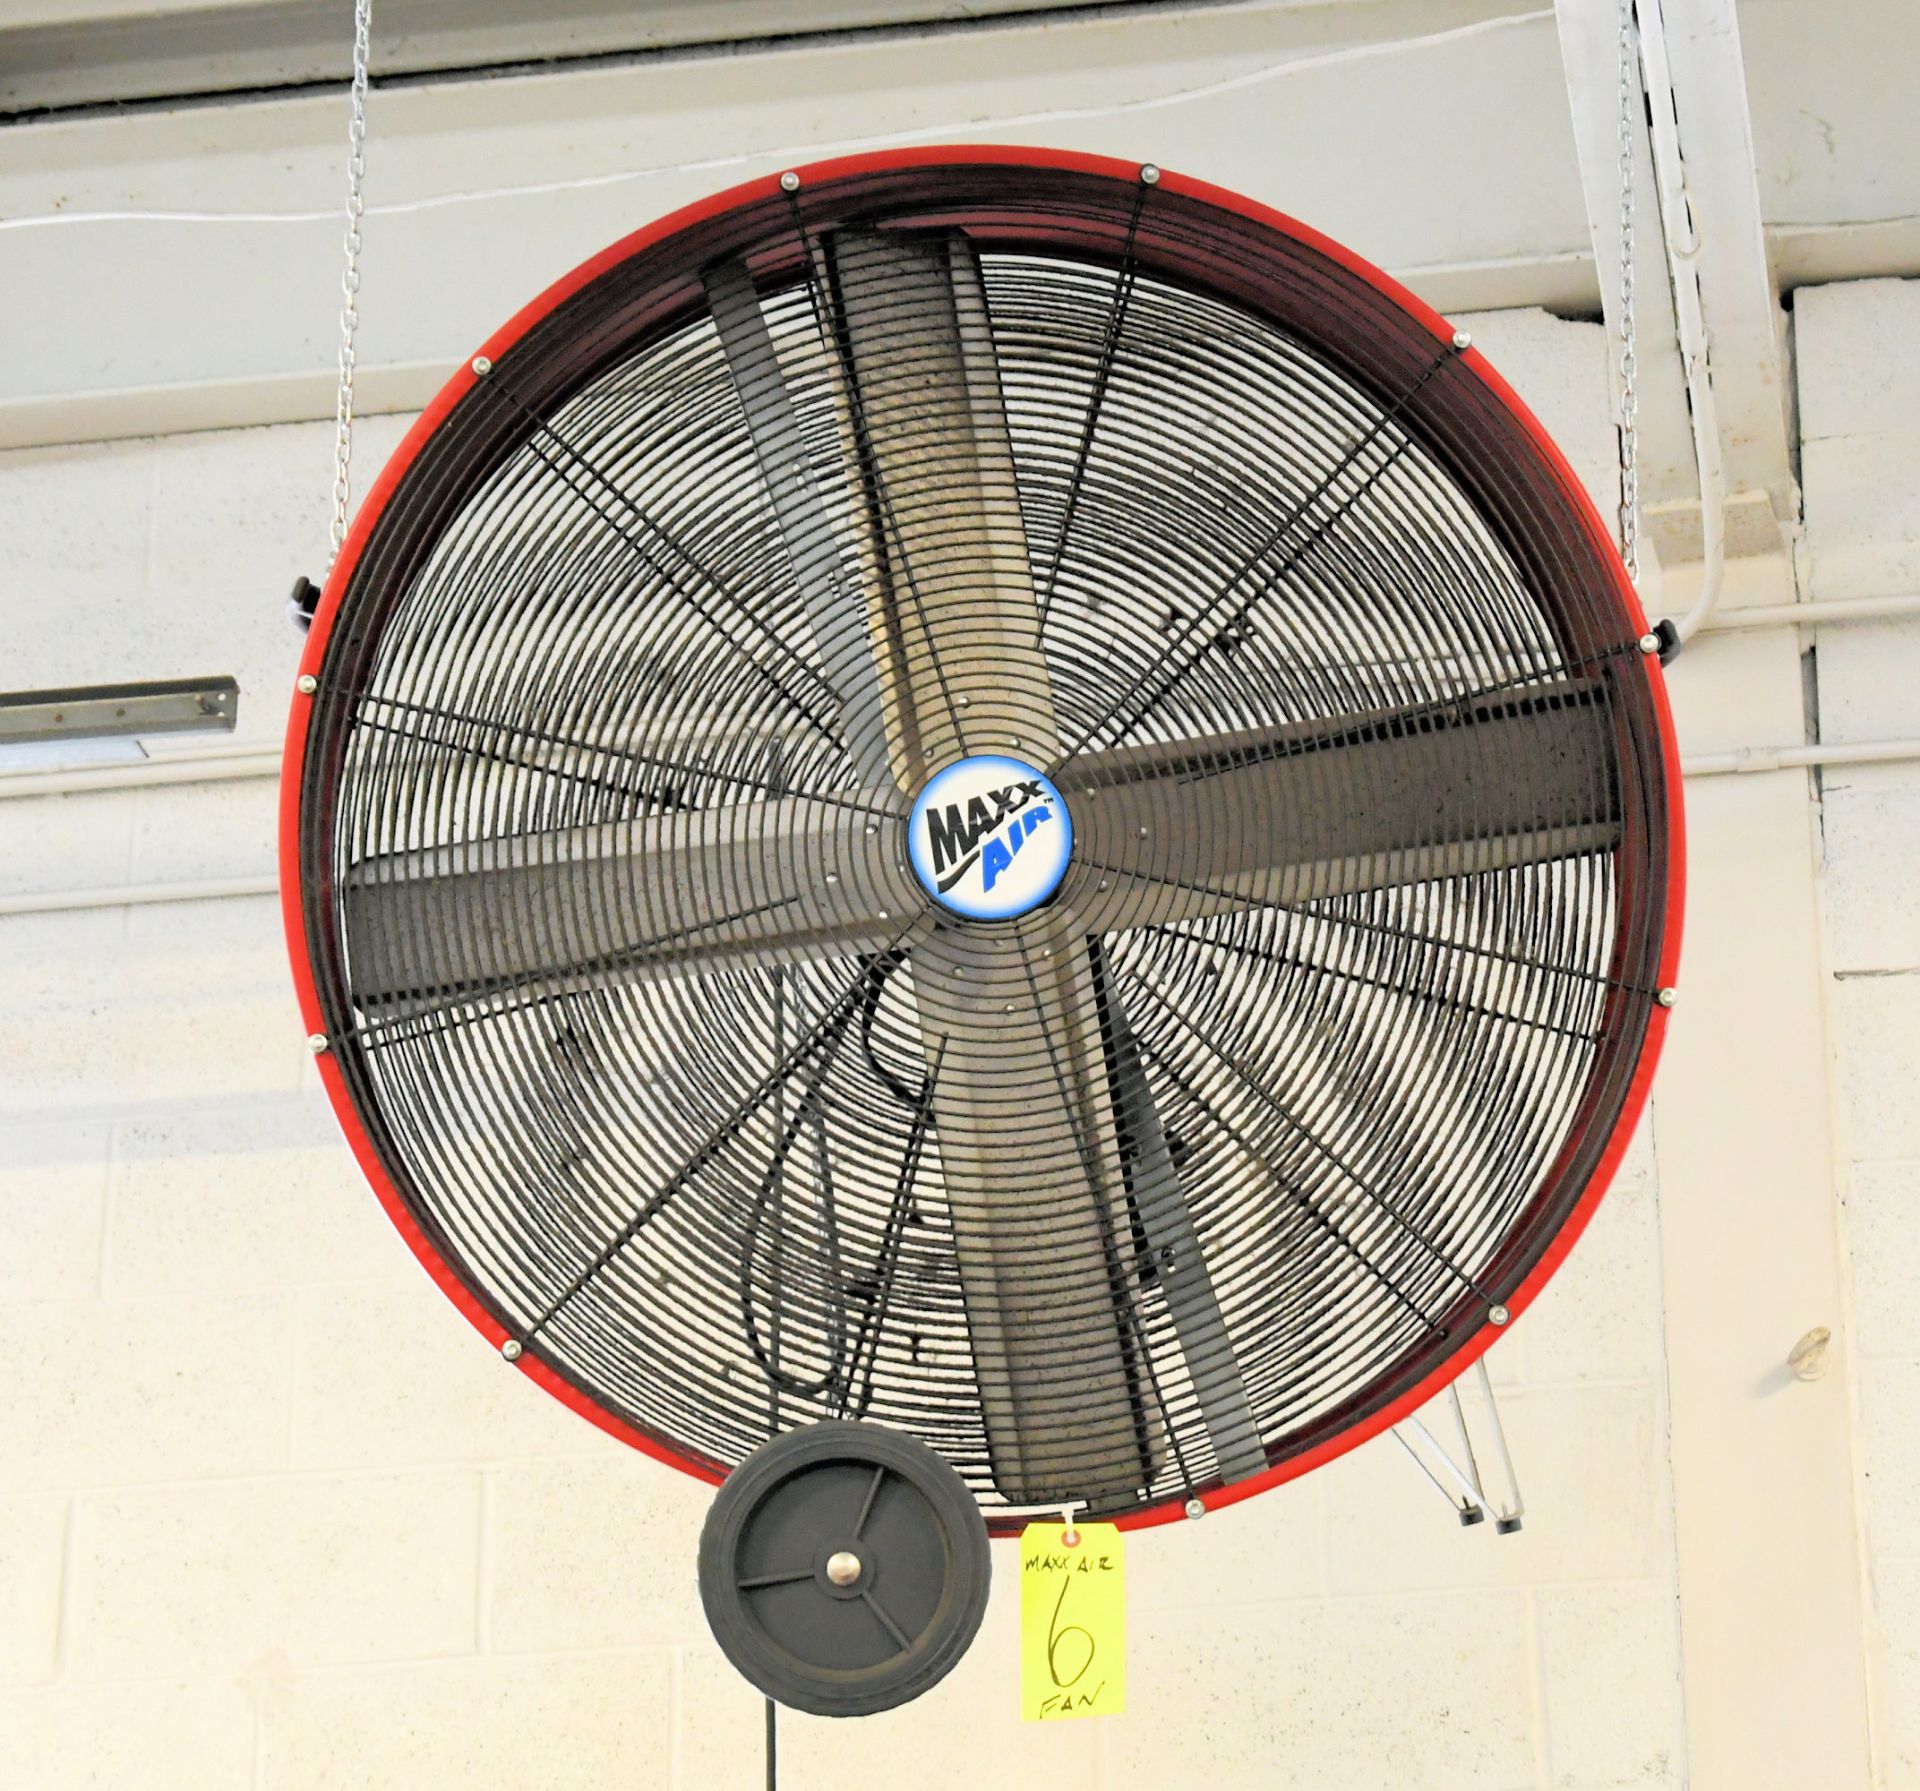 Maxx Air 42" Portable Drum Fan, (Hanging from Ceiling)